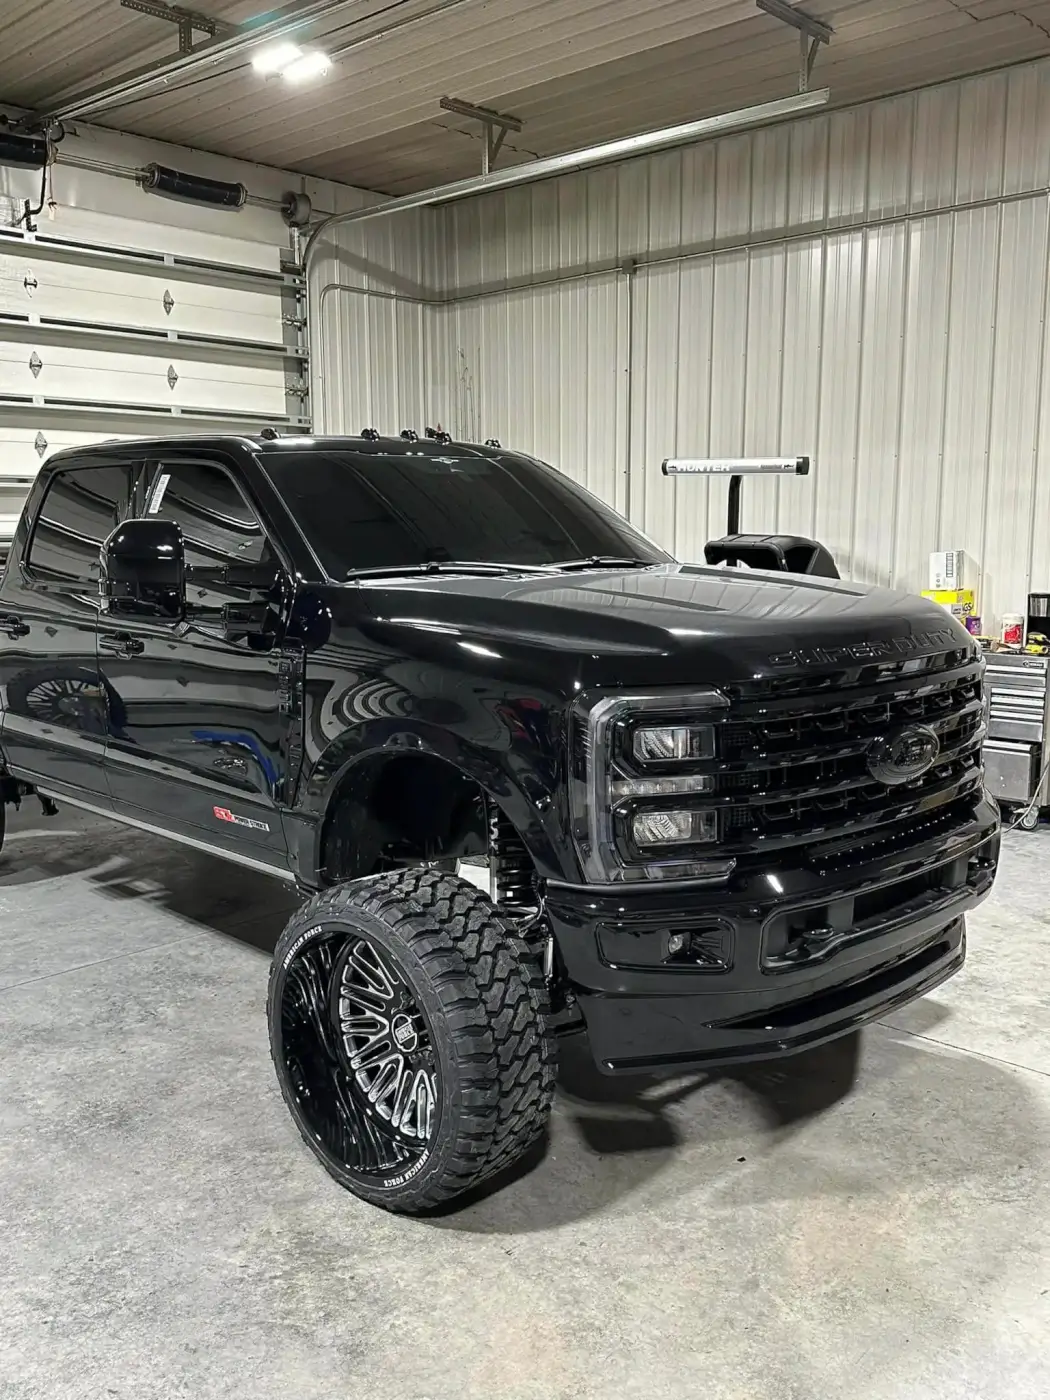 2023 Ford Super Duty High Output 6.7L Power Stroke